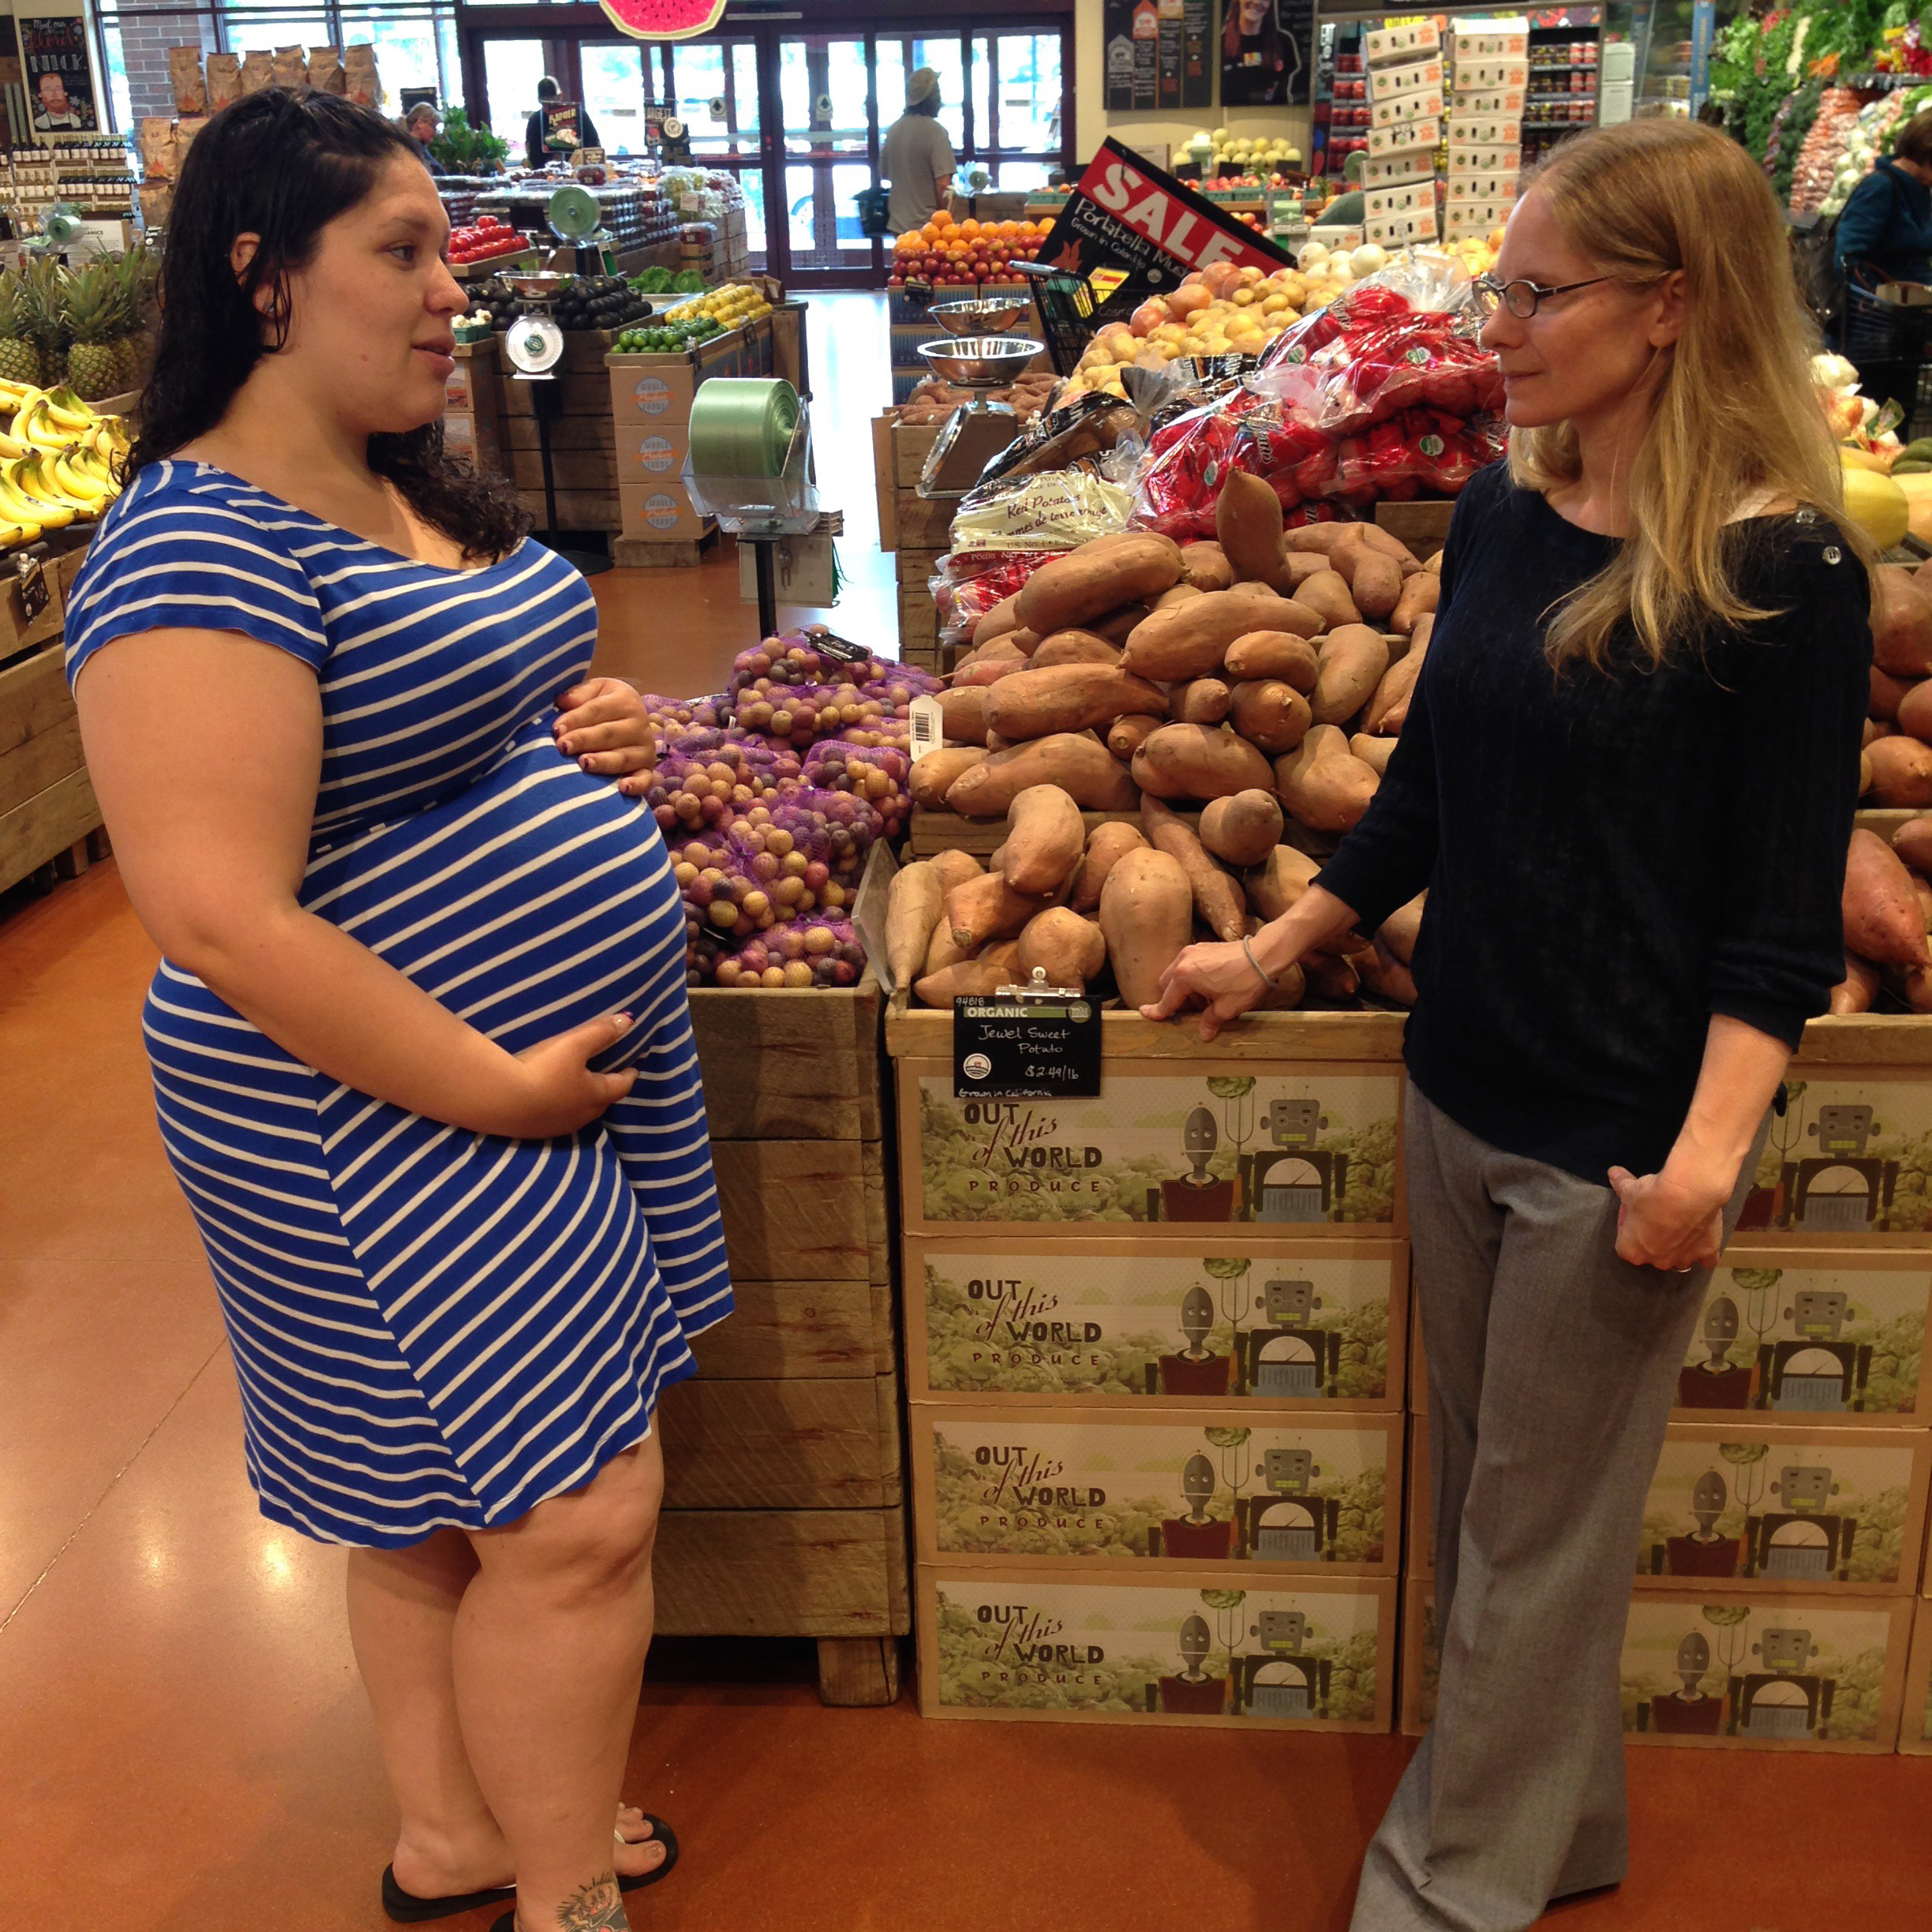 Photo of Curl and Lopez (pregnant) speaking in grocery store